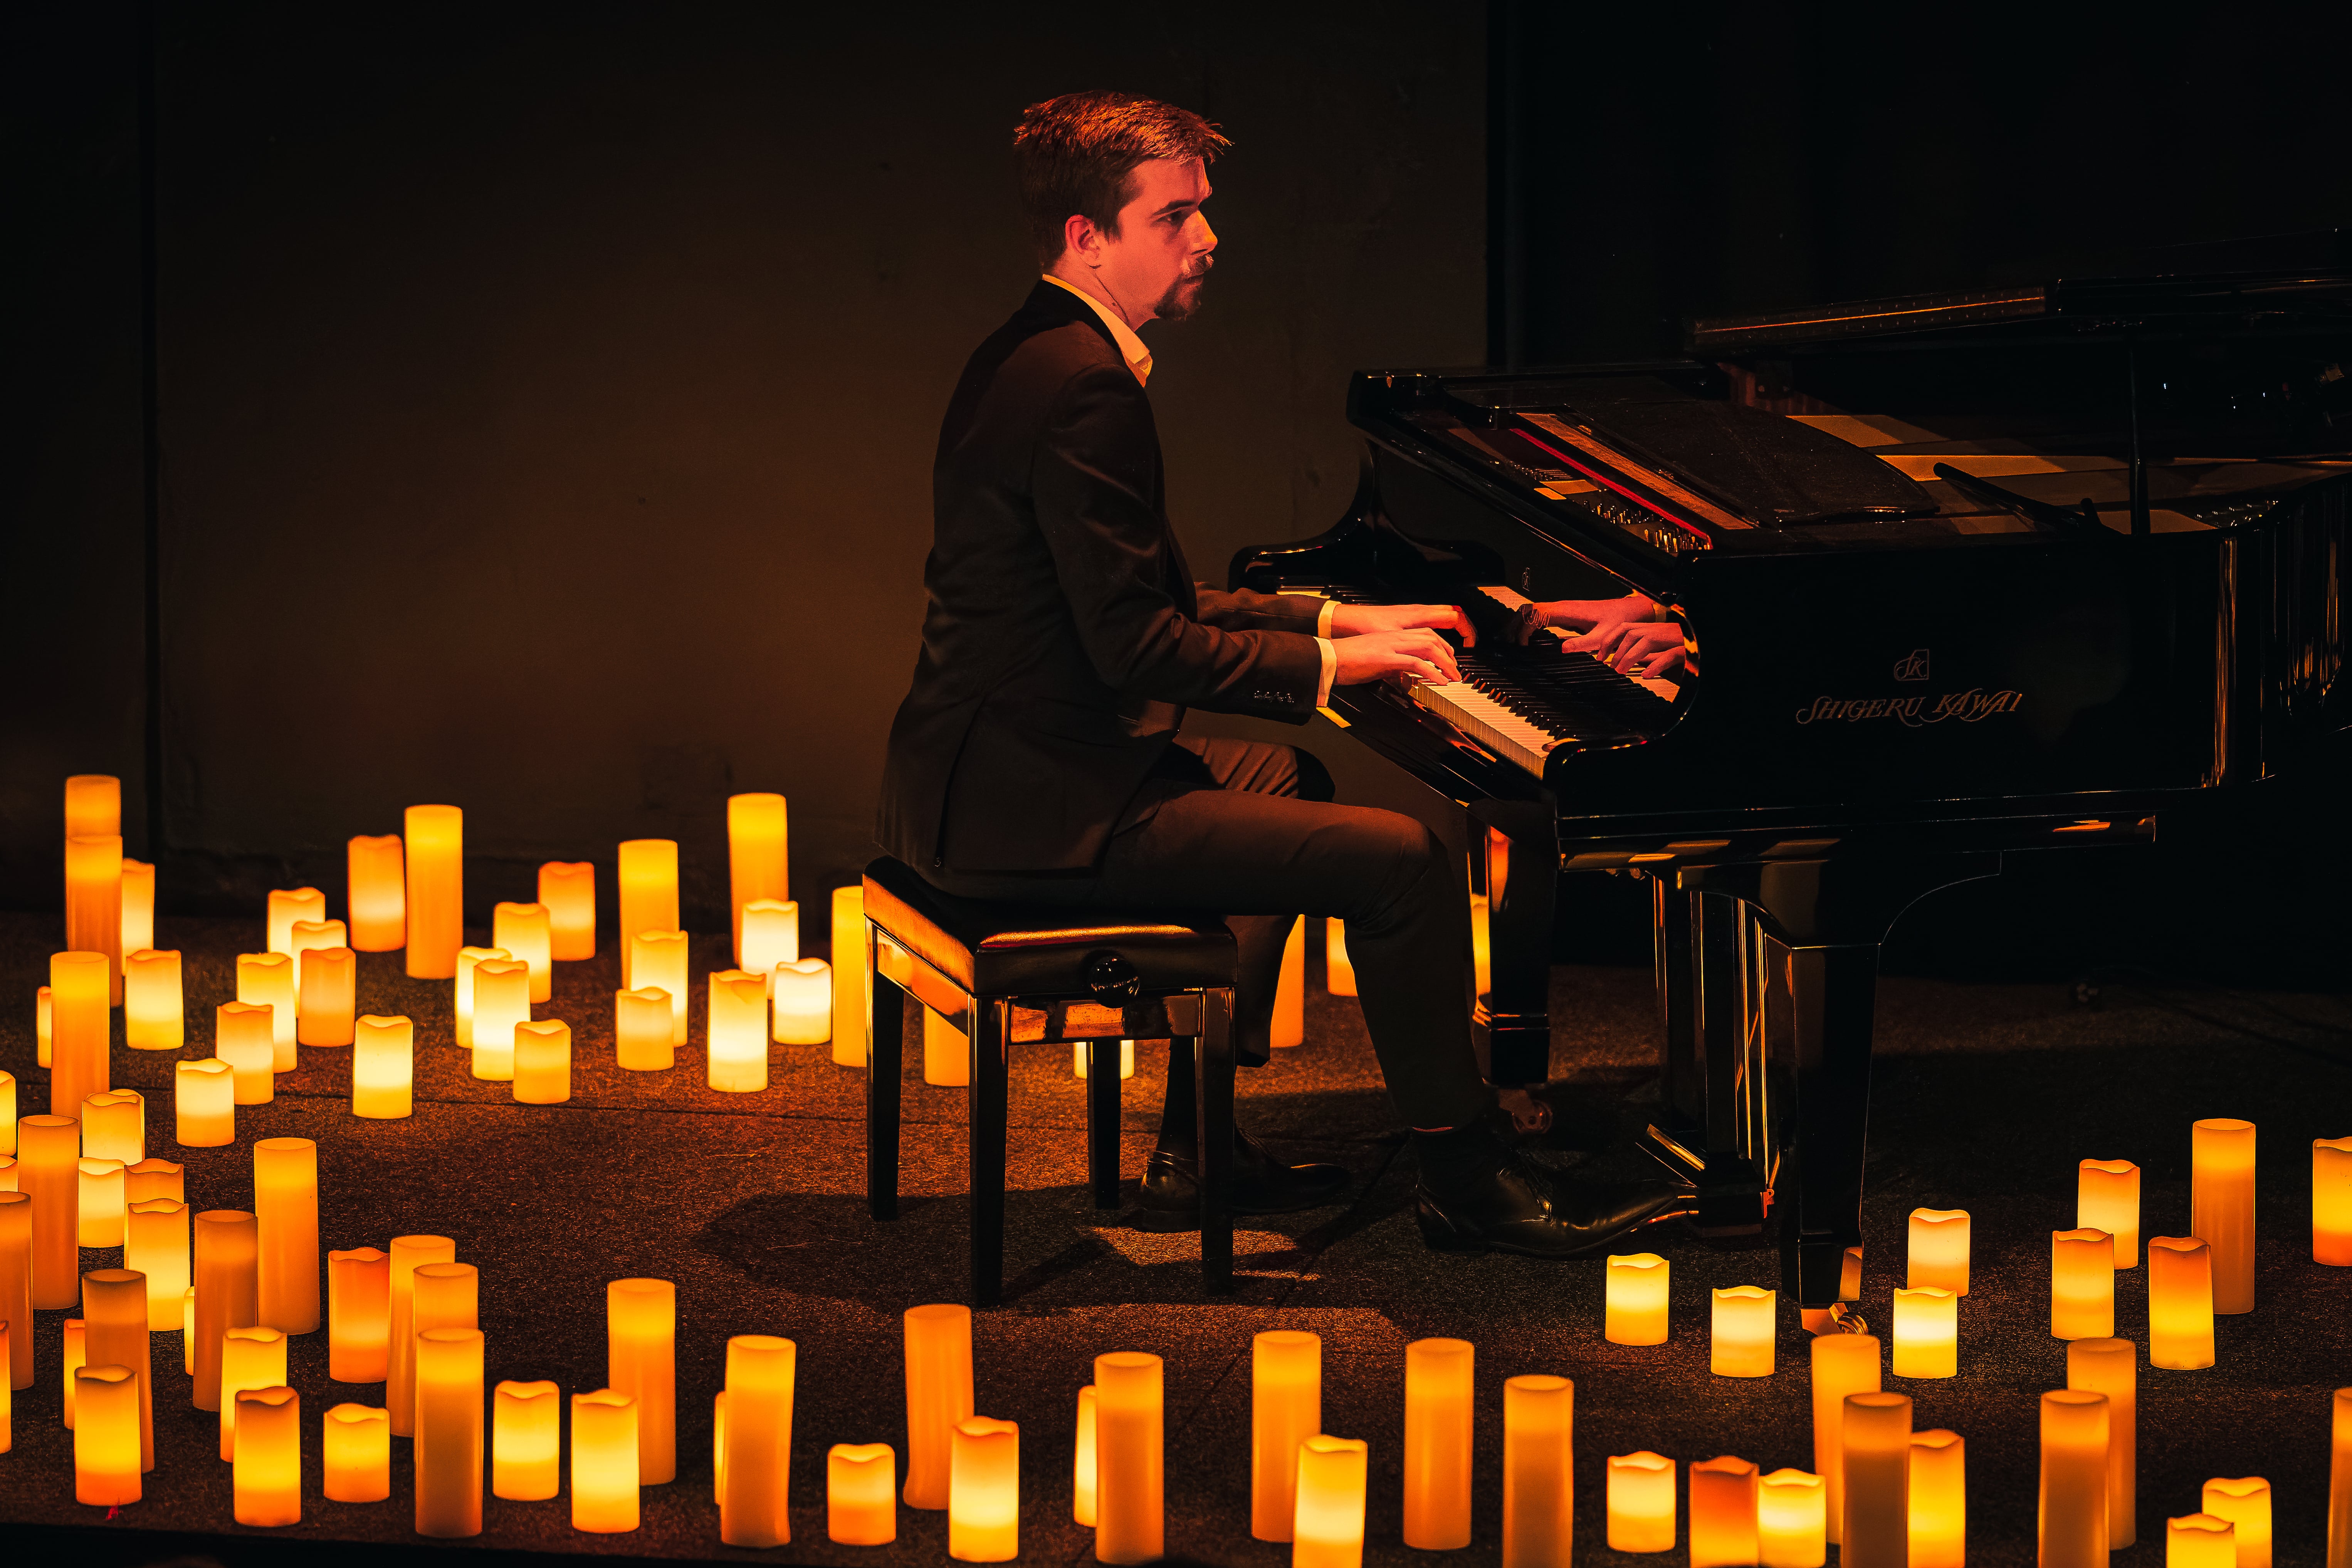 pianist performing surrounded by candles, as seen from the side